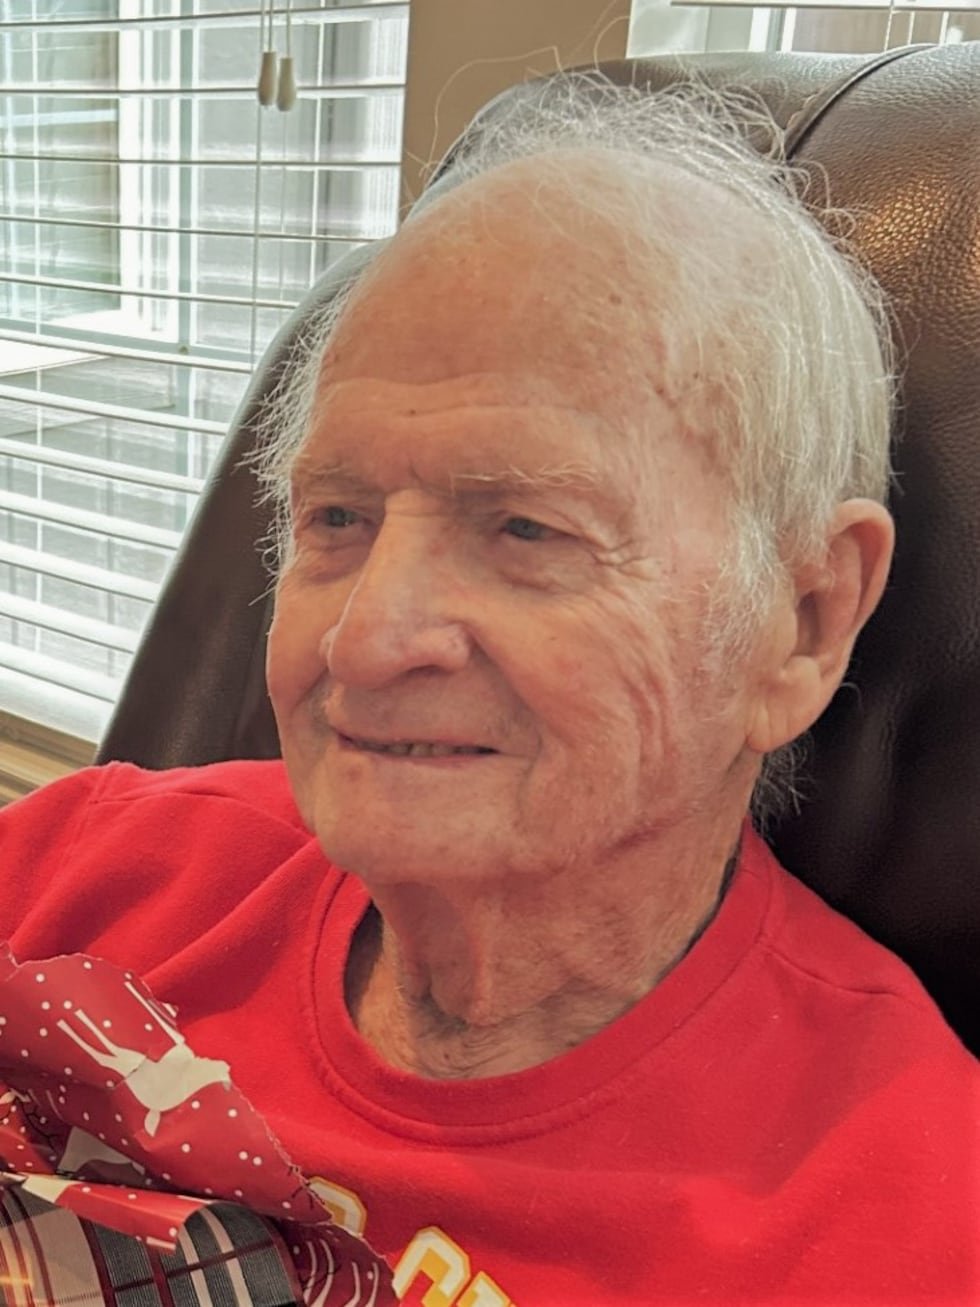 91-year-old man missing from Shawnee County